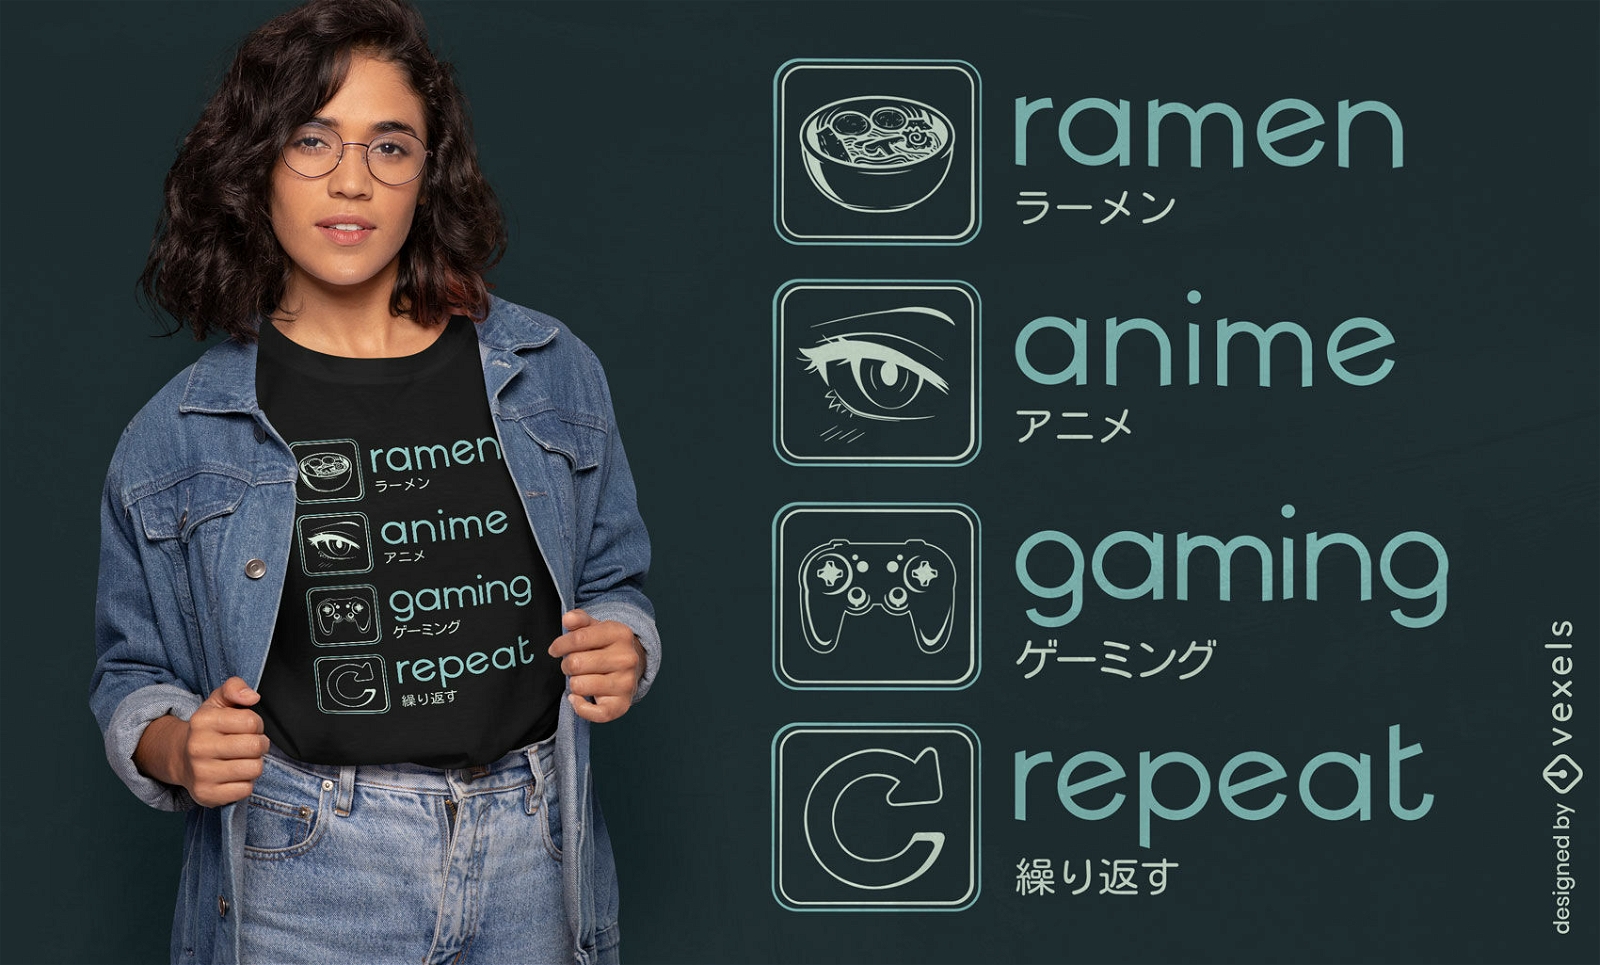 Anime and gaming routine t-shirt design